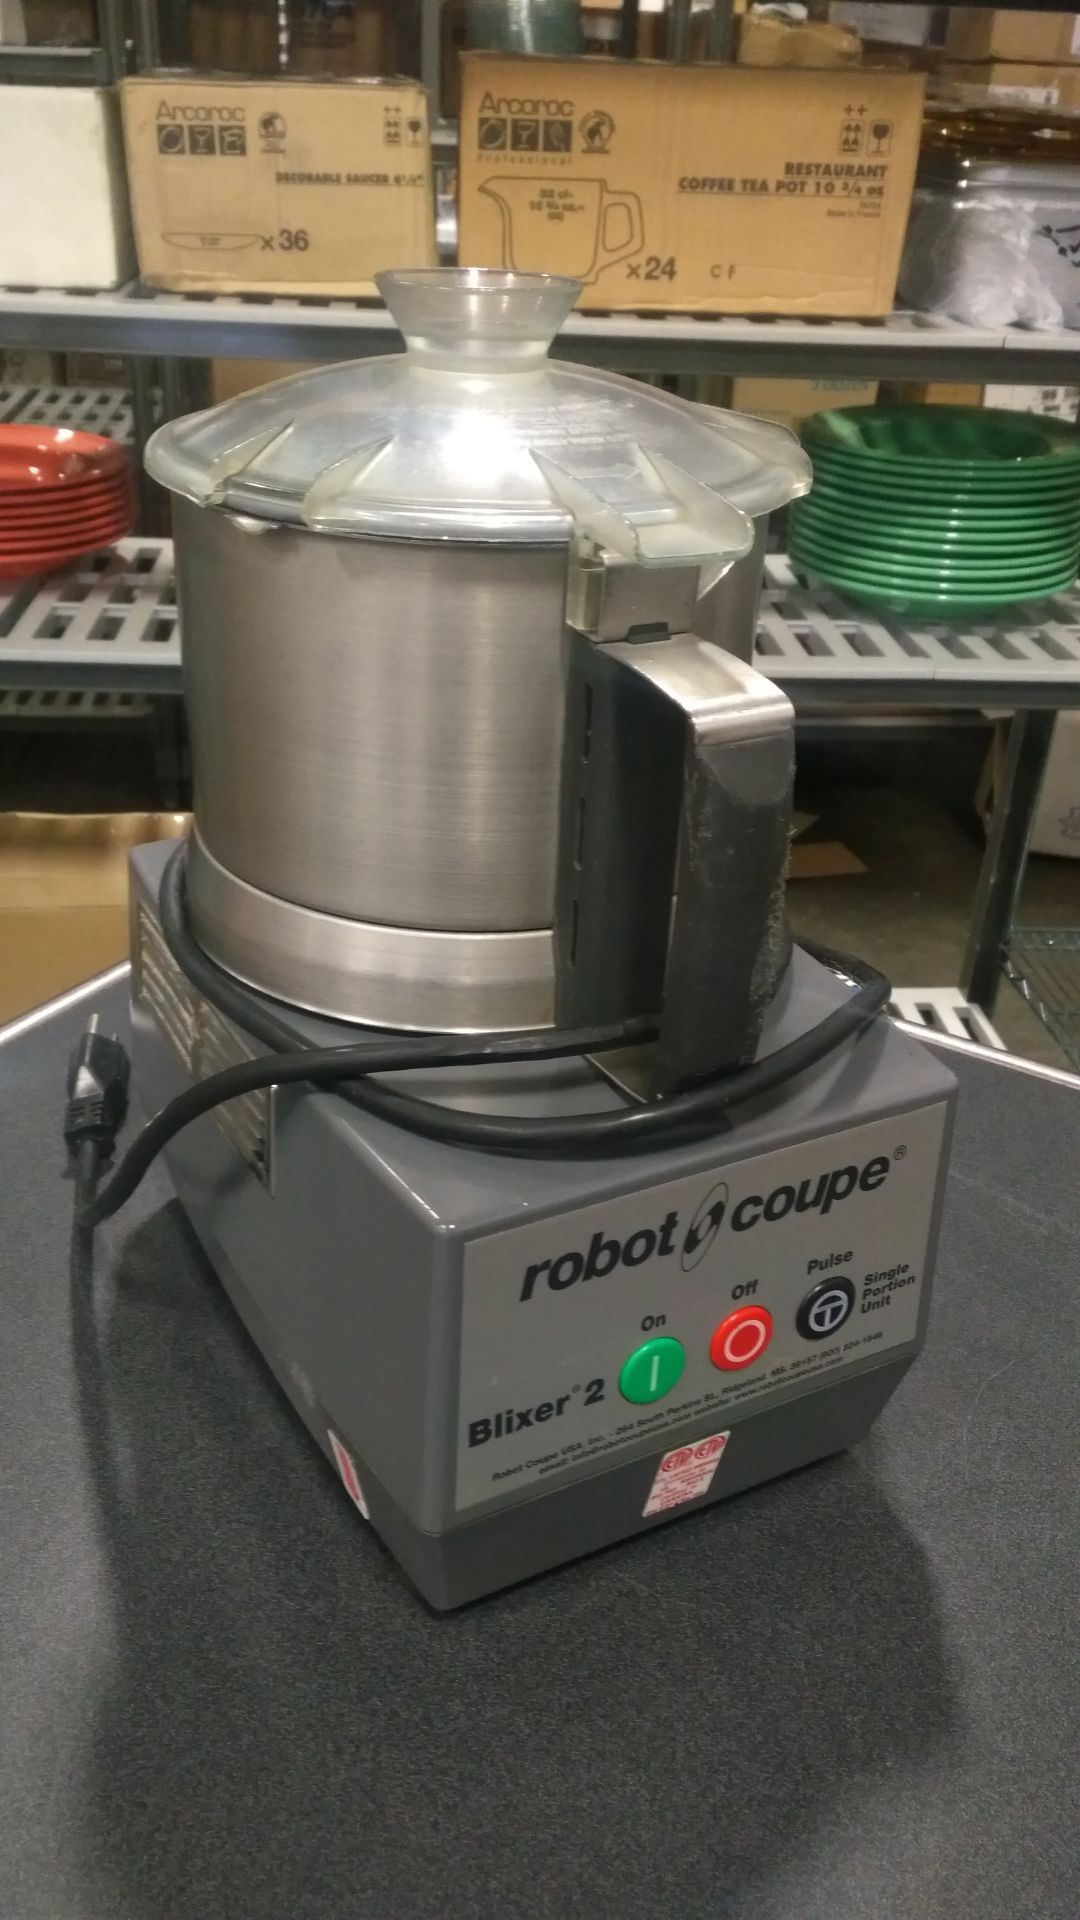 Robot Coupe Blixer 2, tested/working